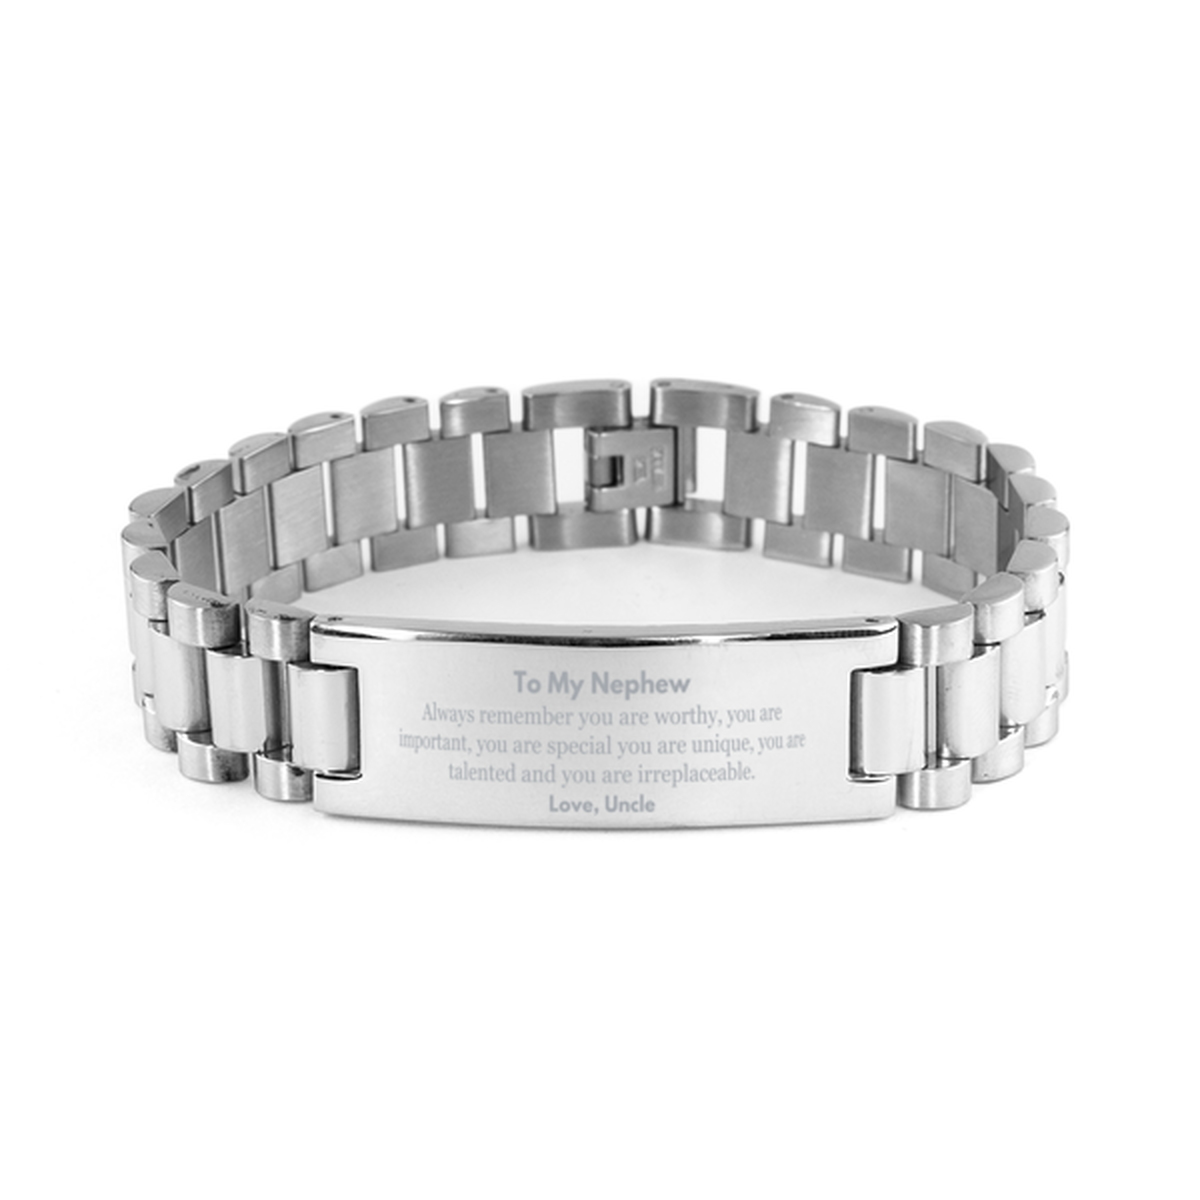 Nephew Birthday Gifts from Uncle, Inspirational Ladder Stainless Steel Bracelet for Nephew Christmas Graduation Gifts for Nephew Always remember you are worthy, you are important. Love, Uncle